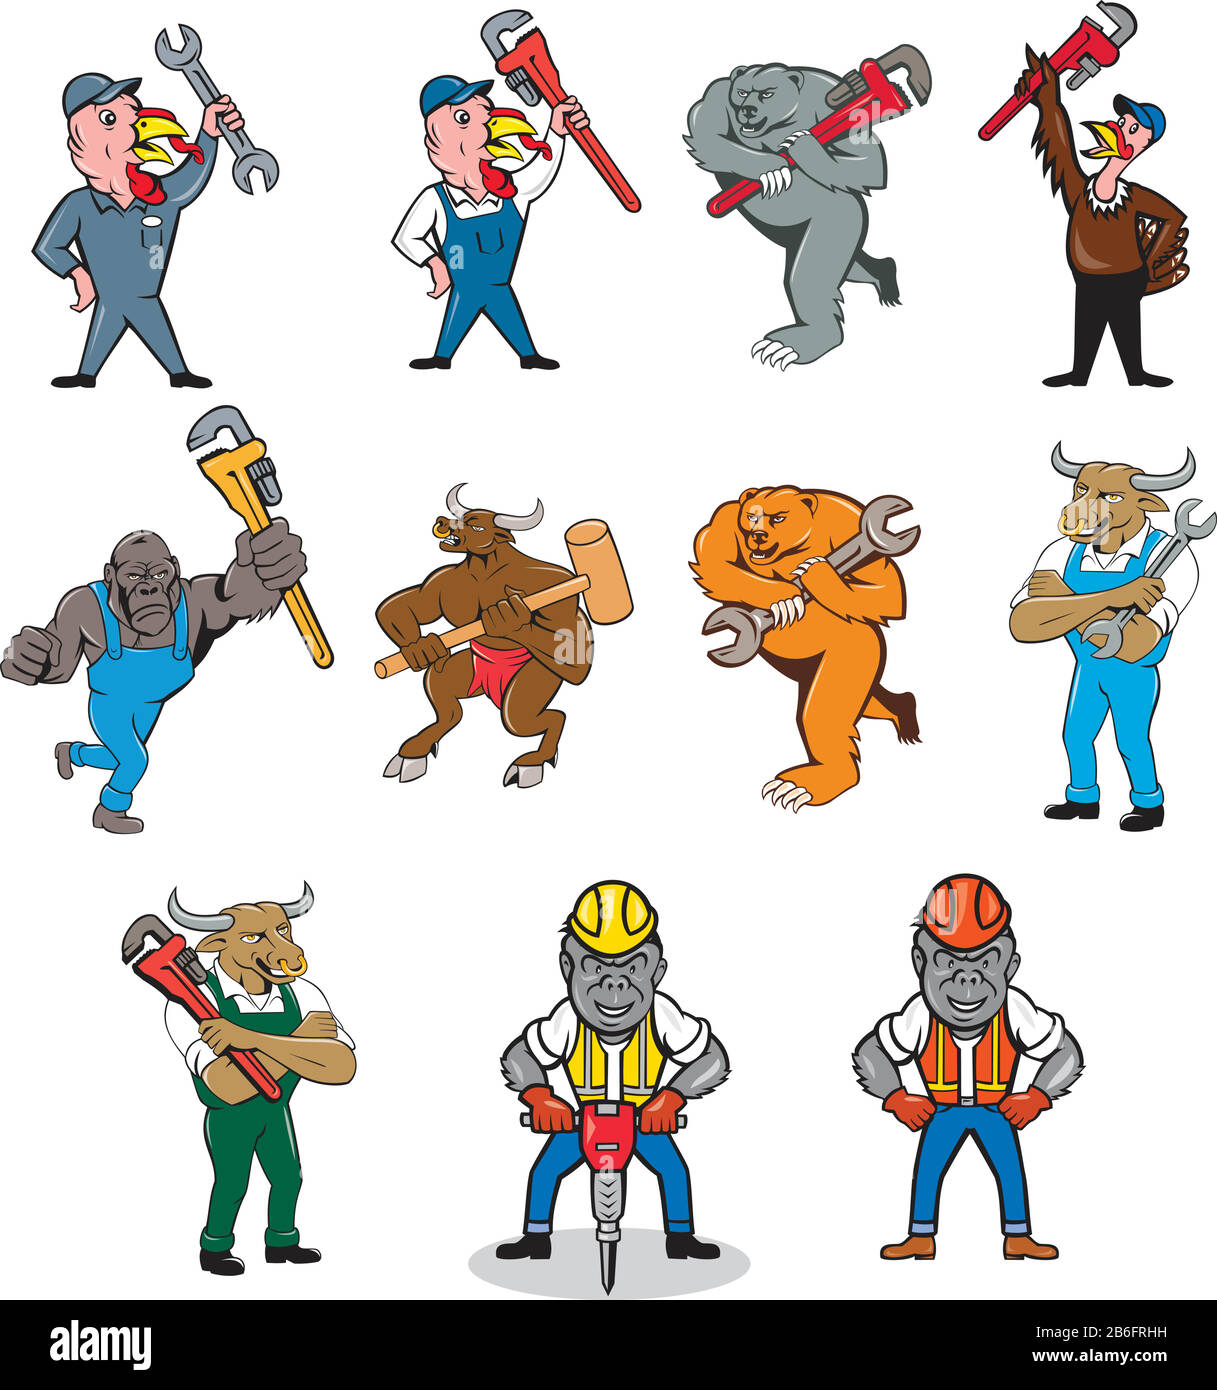 Set or collection of cartoon character mascot style illustration of an animal tradesman like a turkey, bear, bull, gorilla that is a plumber, mechanic Stock Vector